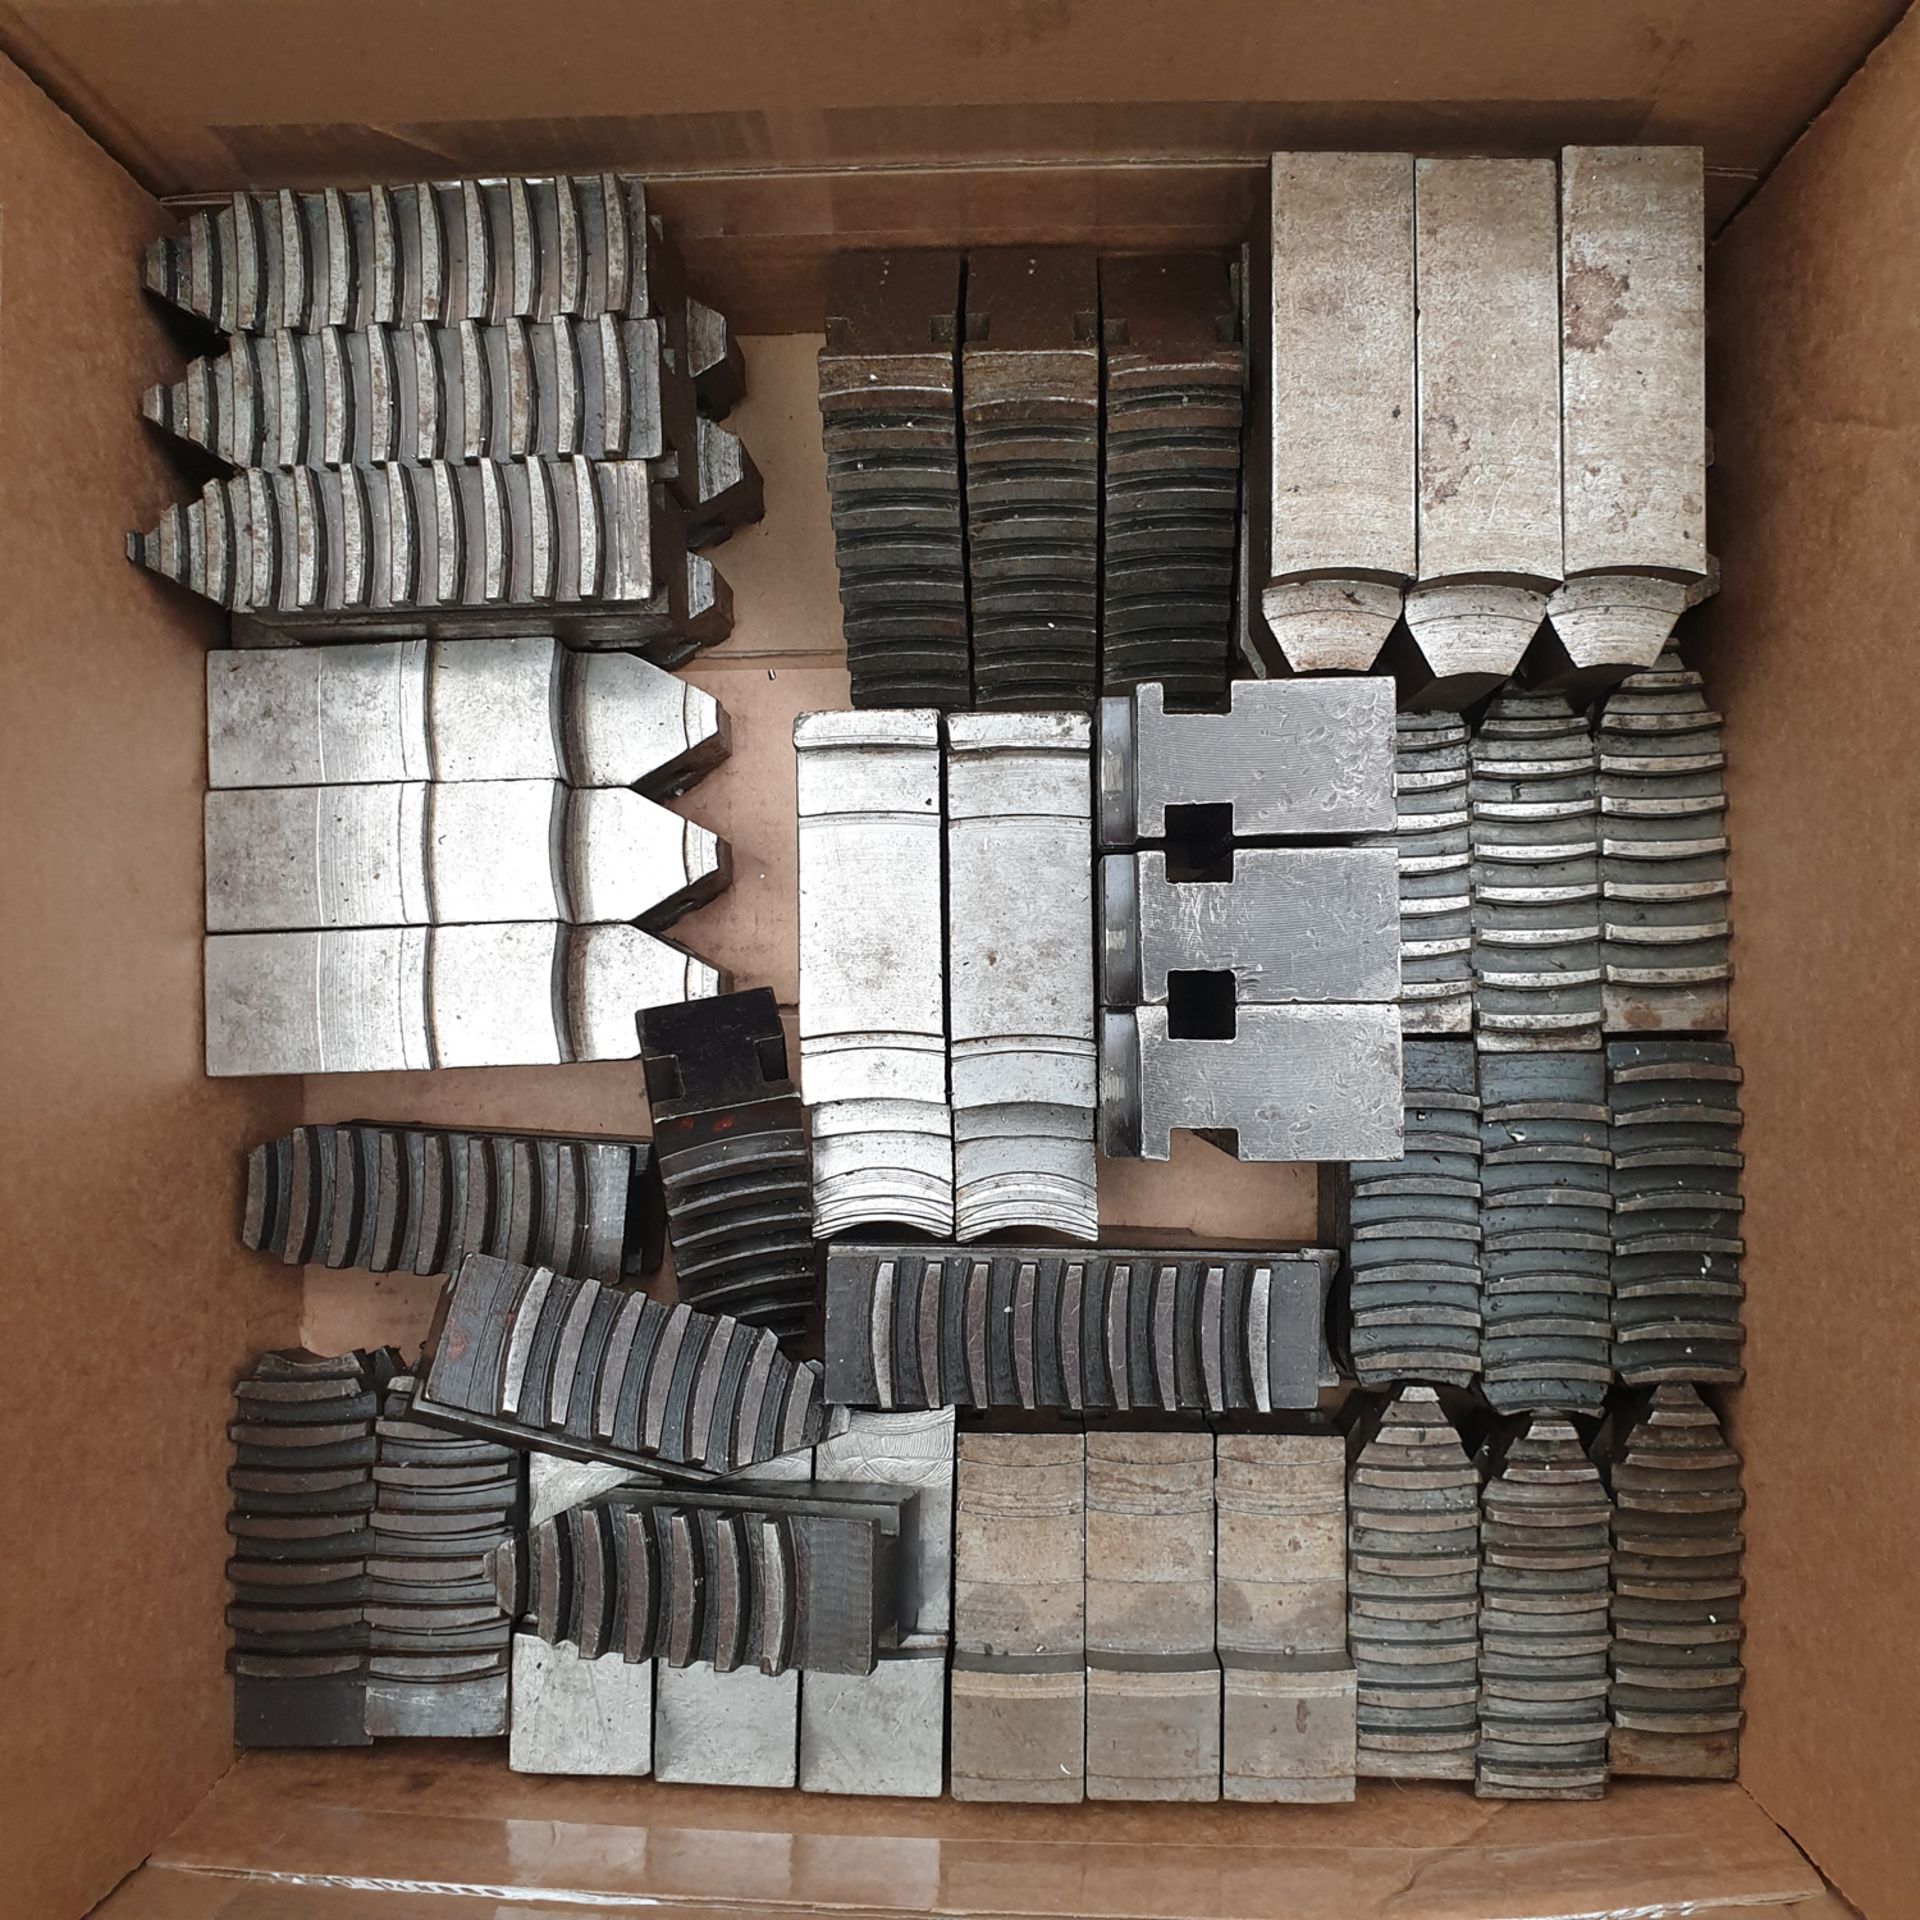 15 Sets of Soft Jaws for Lathe Chuck